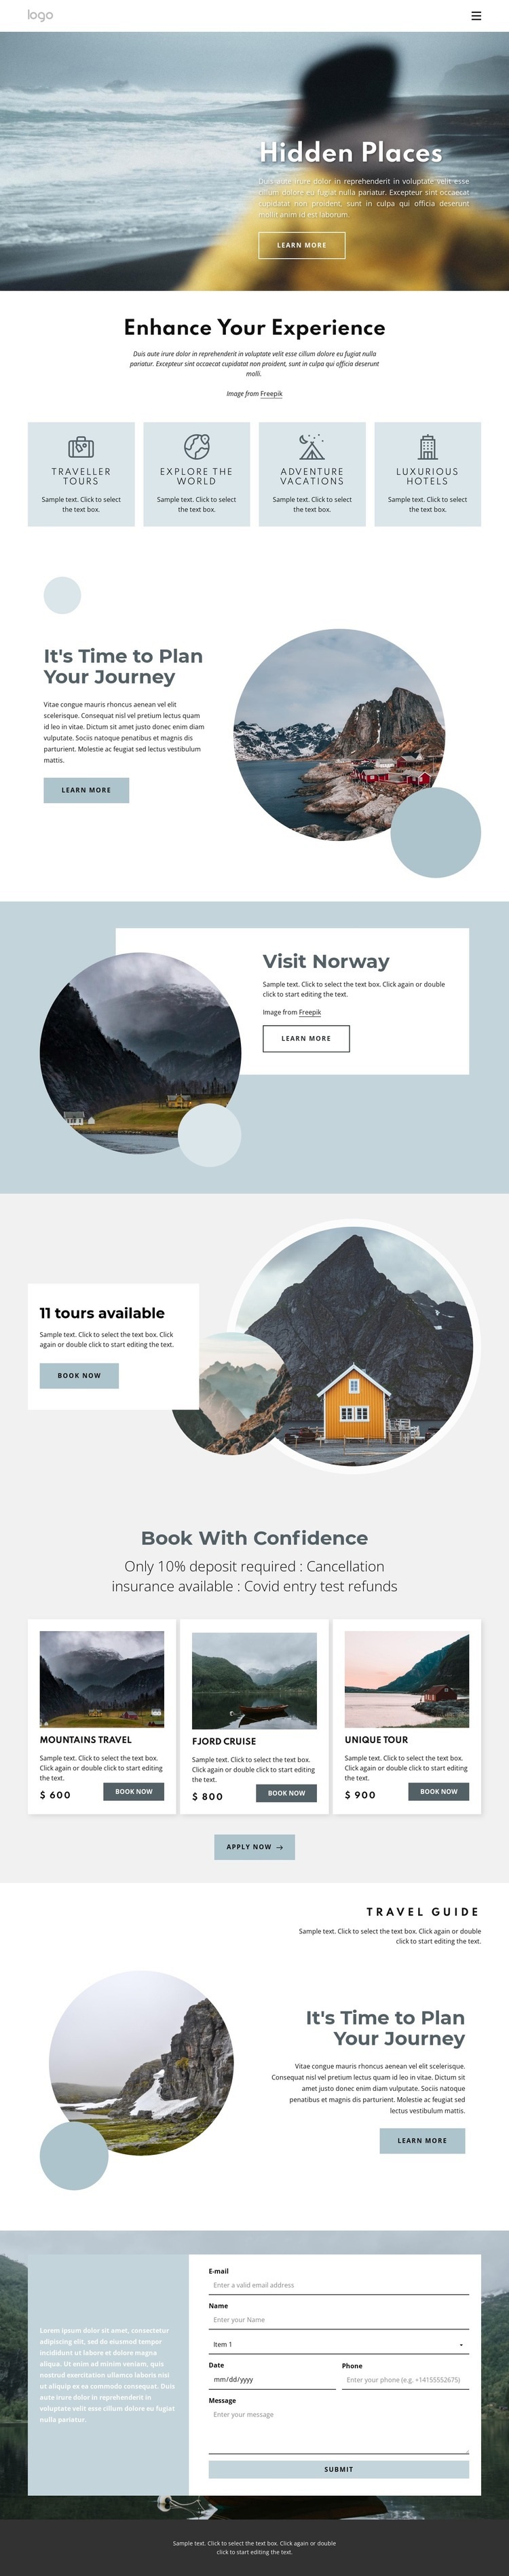 We find the hidden places Homepage Design